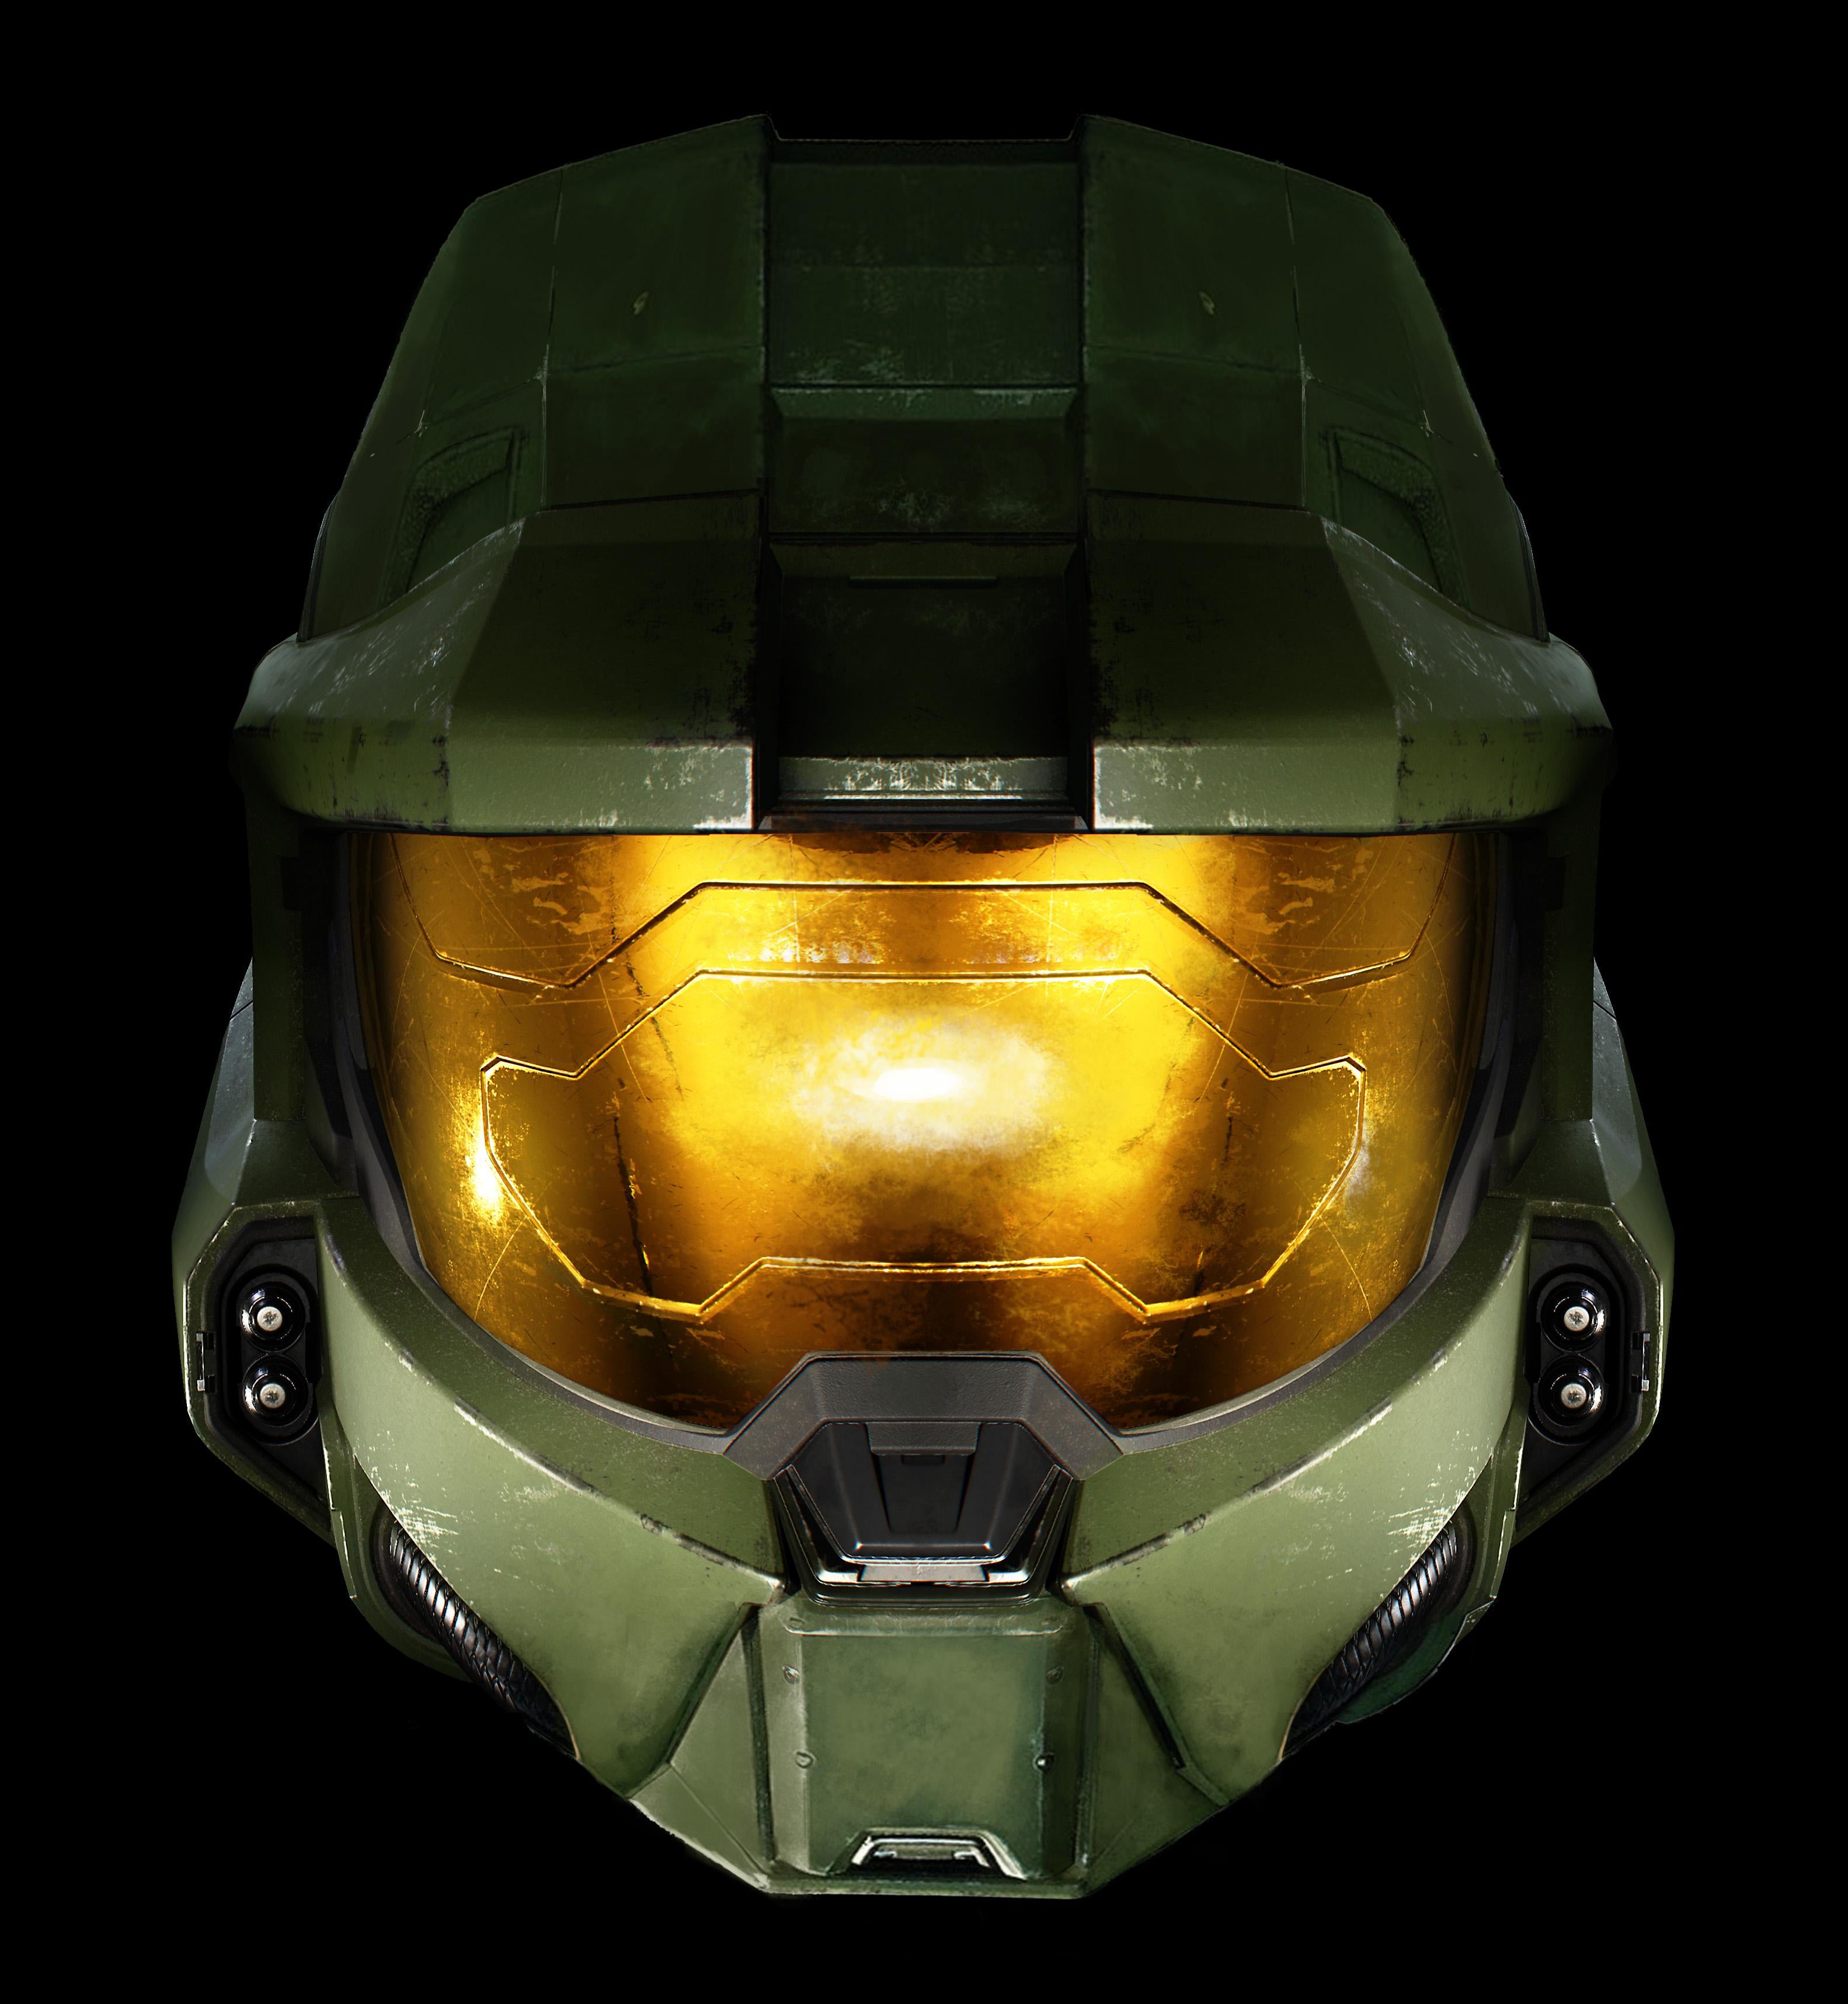 I photohoped the halo ininite helmet from the wallpaper with the one seen in the trailer just to see what it would look like from this angle and here's the result: halo